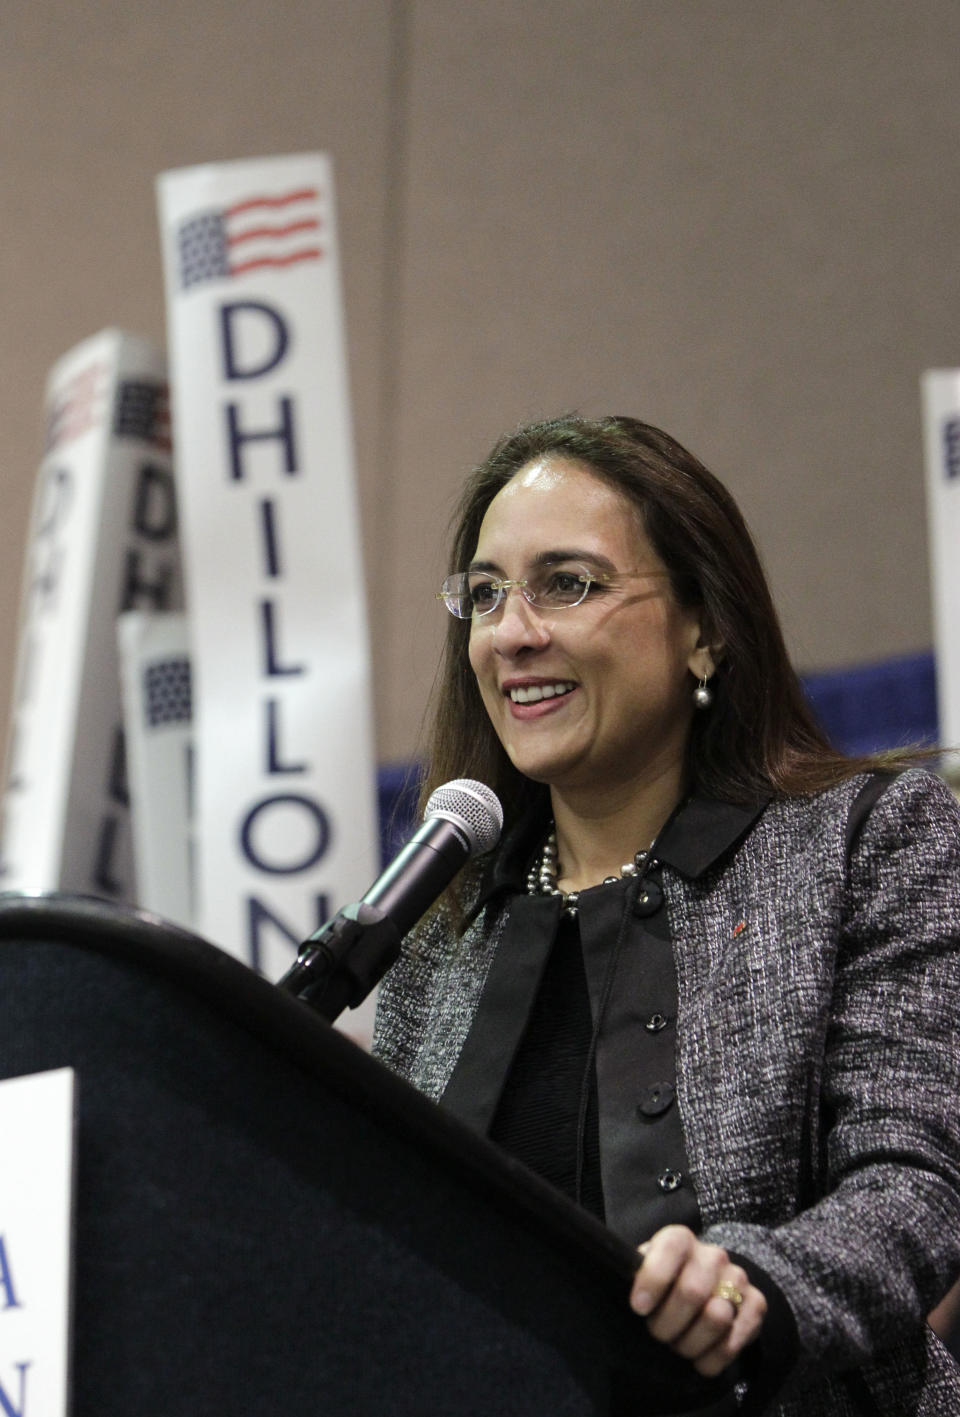 In this photo taken March 3, 2013, San Francisco attorney Harmeet Dhillon speaks at the California State Republican convention where she was elected as the party's vice chairperson, the first woman to hold the position. Dhillion is among a growing roster of candidates and elected officials of Indian descent.(AP Photo/Rich Pedroncelli)